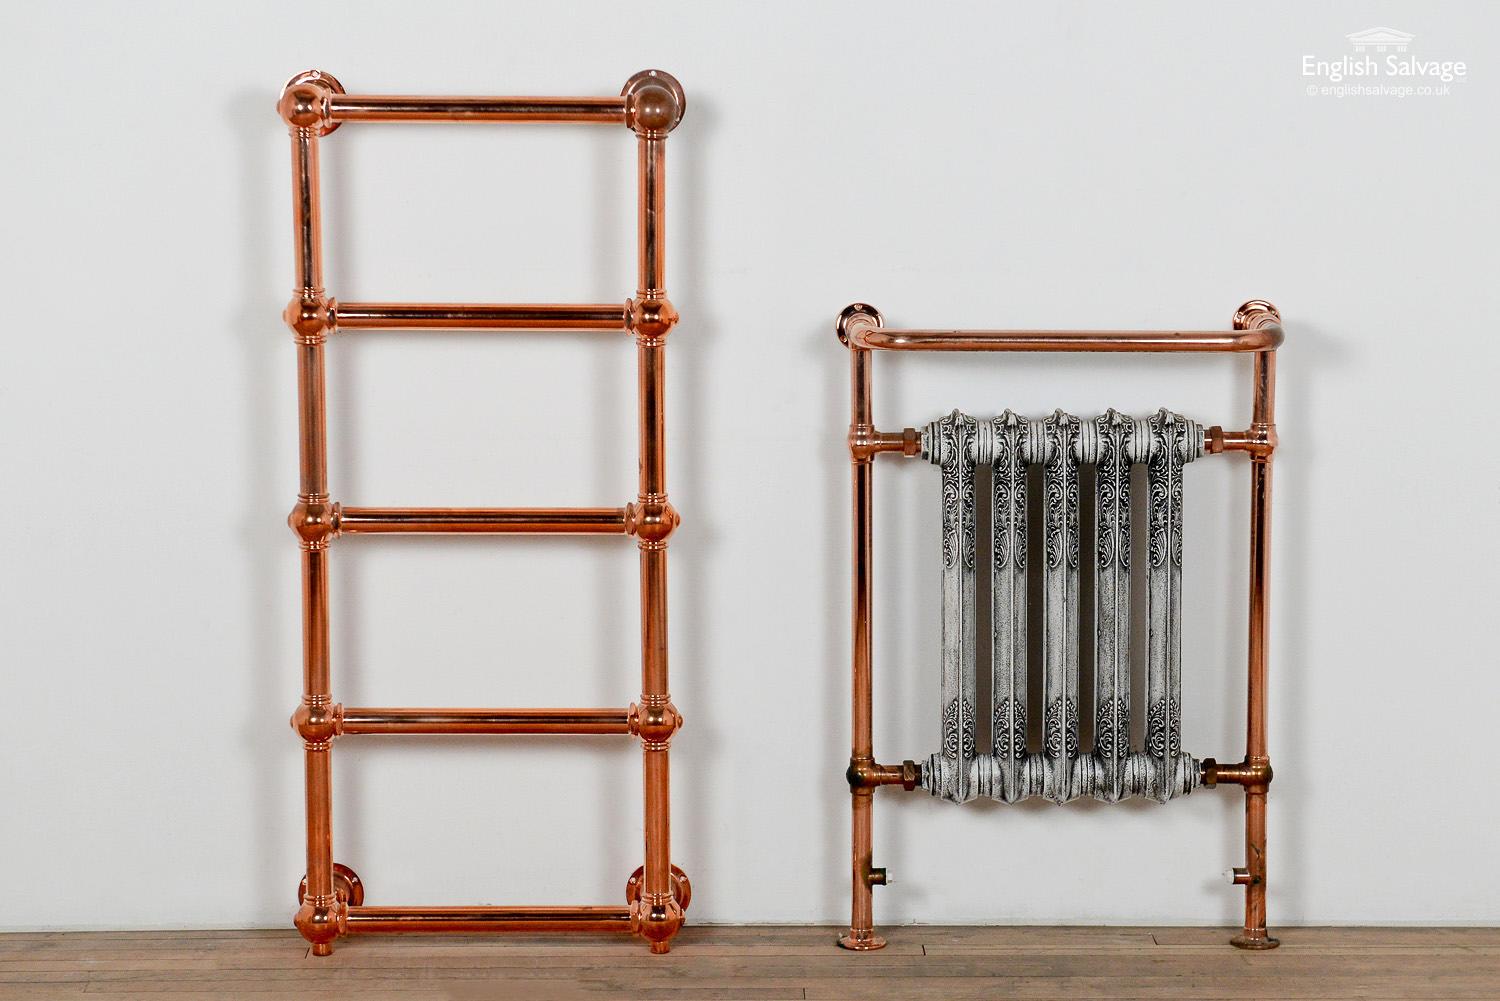 Ex-display copper-plated steel towel rail and radiator. The uncoated copper plate can either be allowed to tarnish for a patinated appearance or coated to preserve the new look. Rococo style middle section of the radiator is painted grey. Radiator